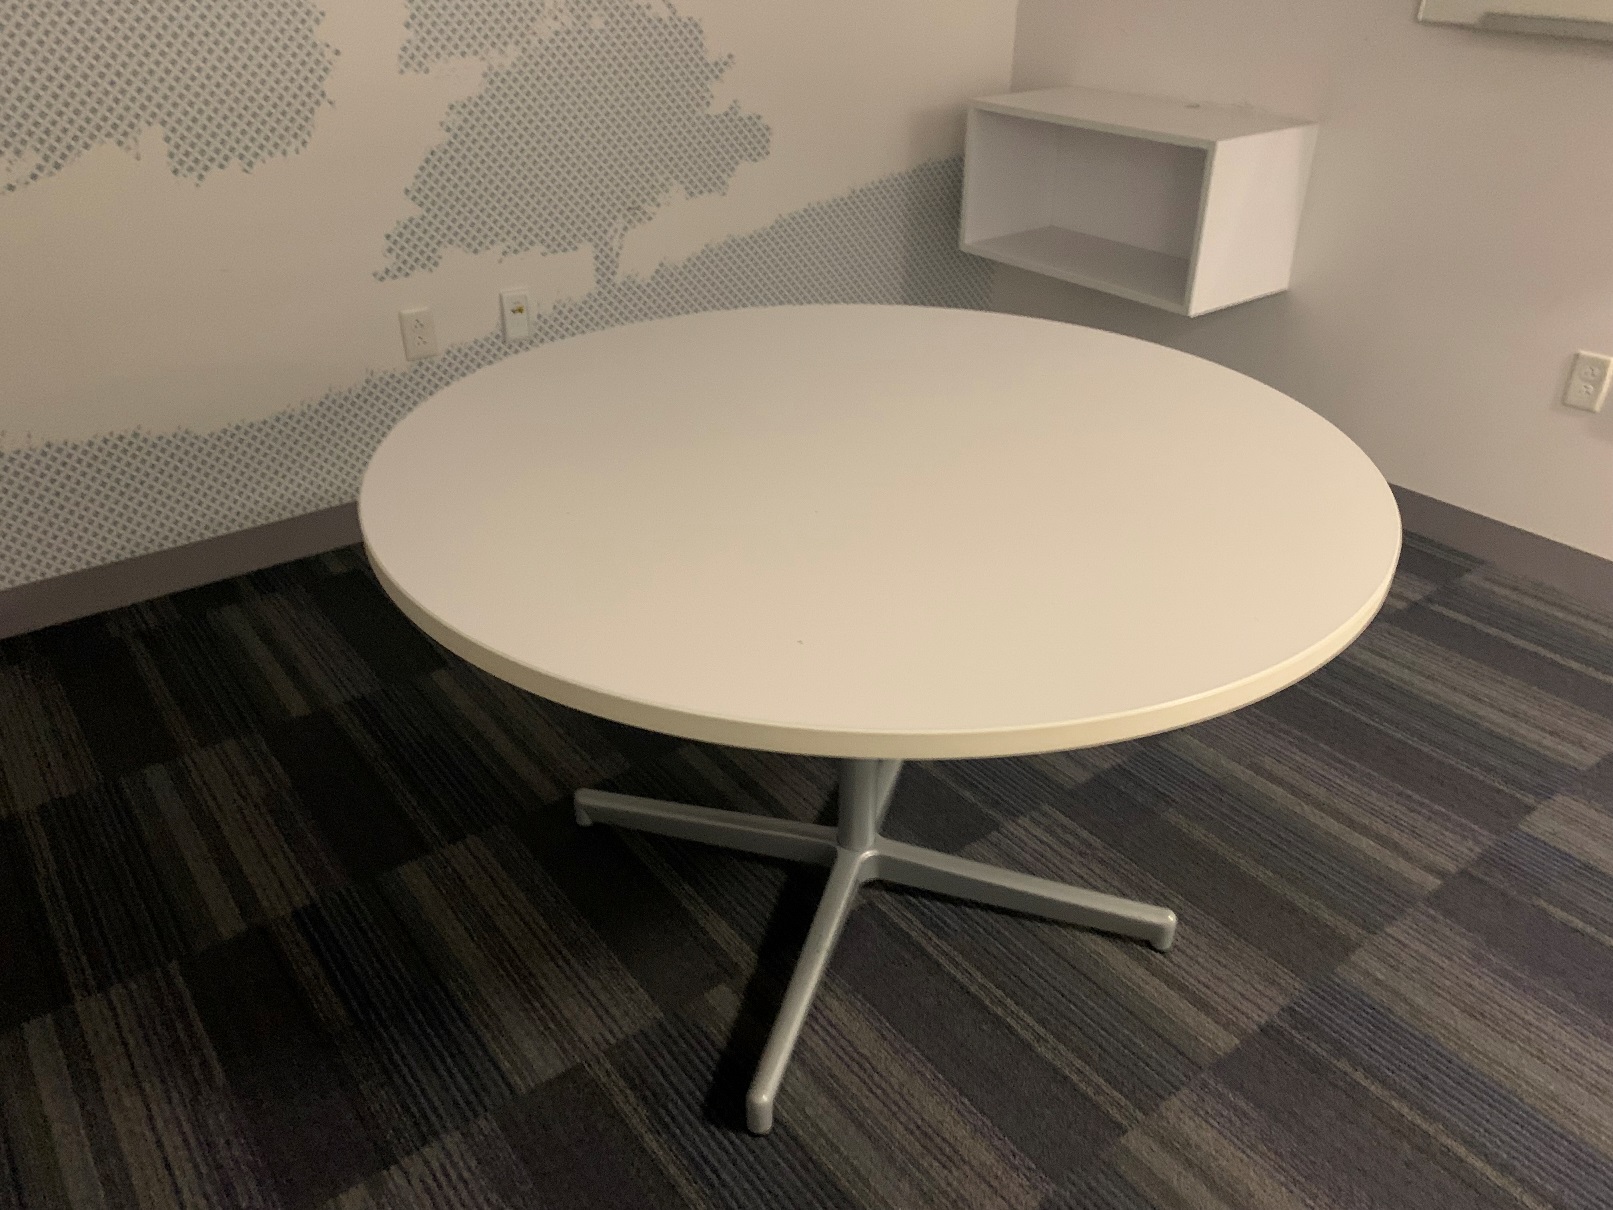 T12269 - Coalesse Laminate Cafe Tables